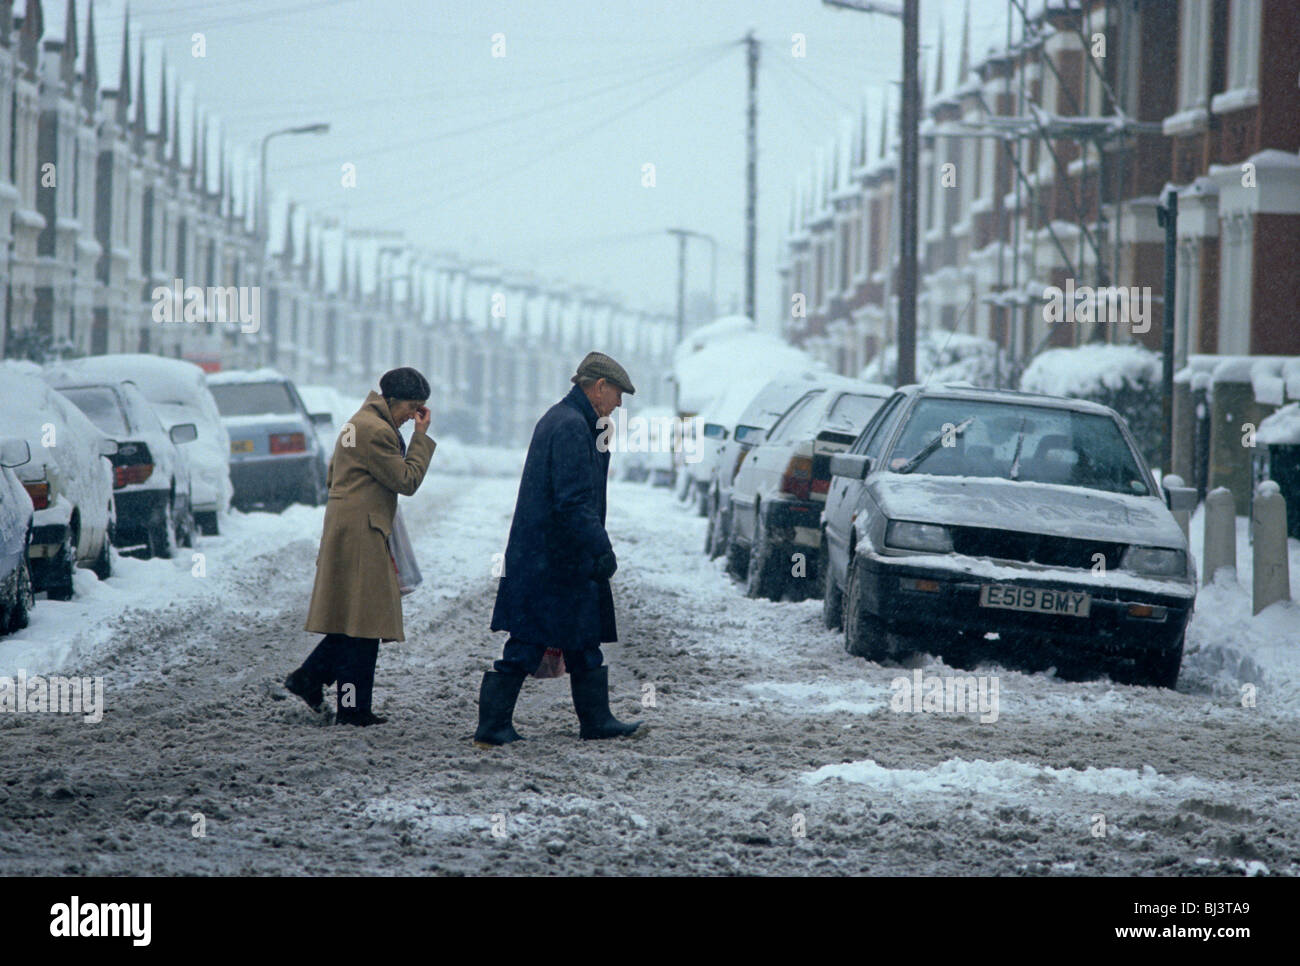 Making their way across a snow-swept road in Norwood, south London, an elderly couple tread warily as the snow turns to slush. Stock Photo